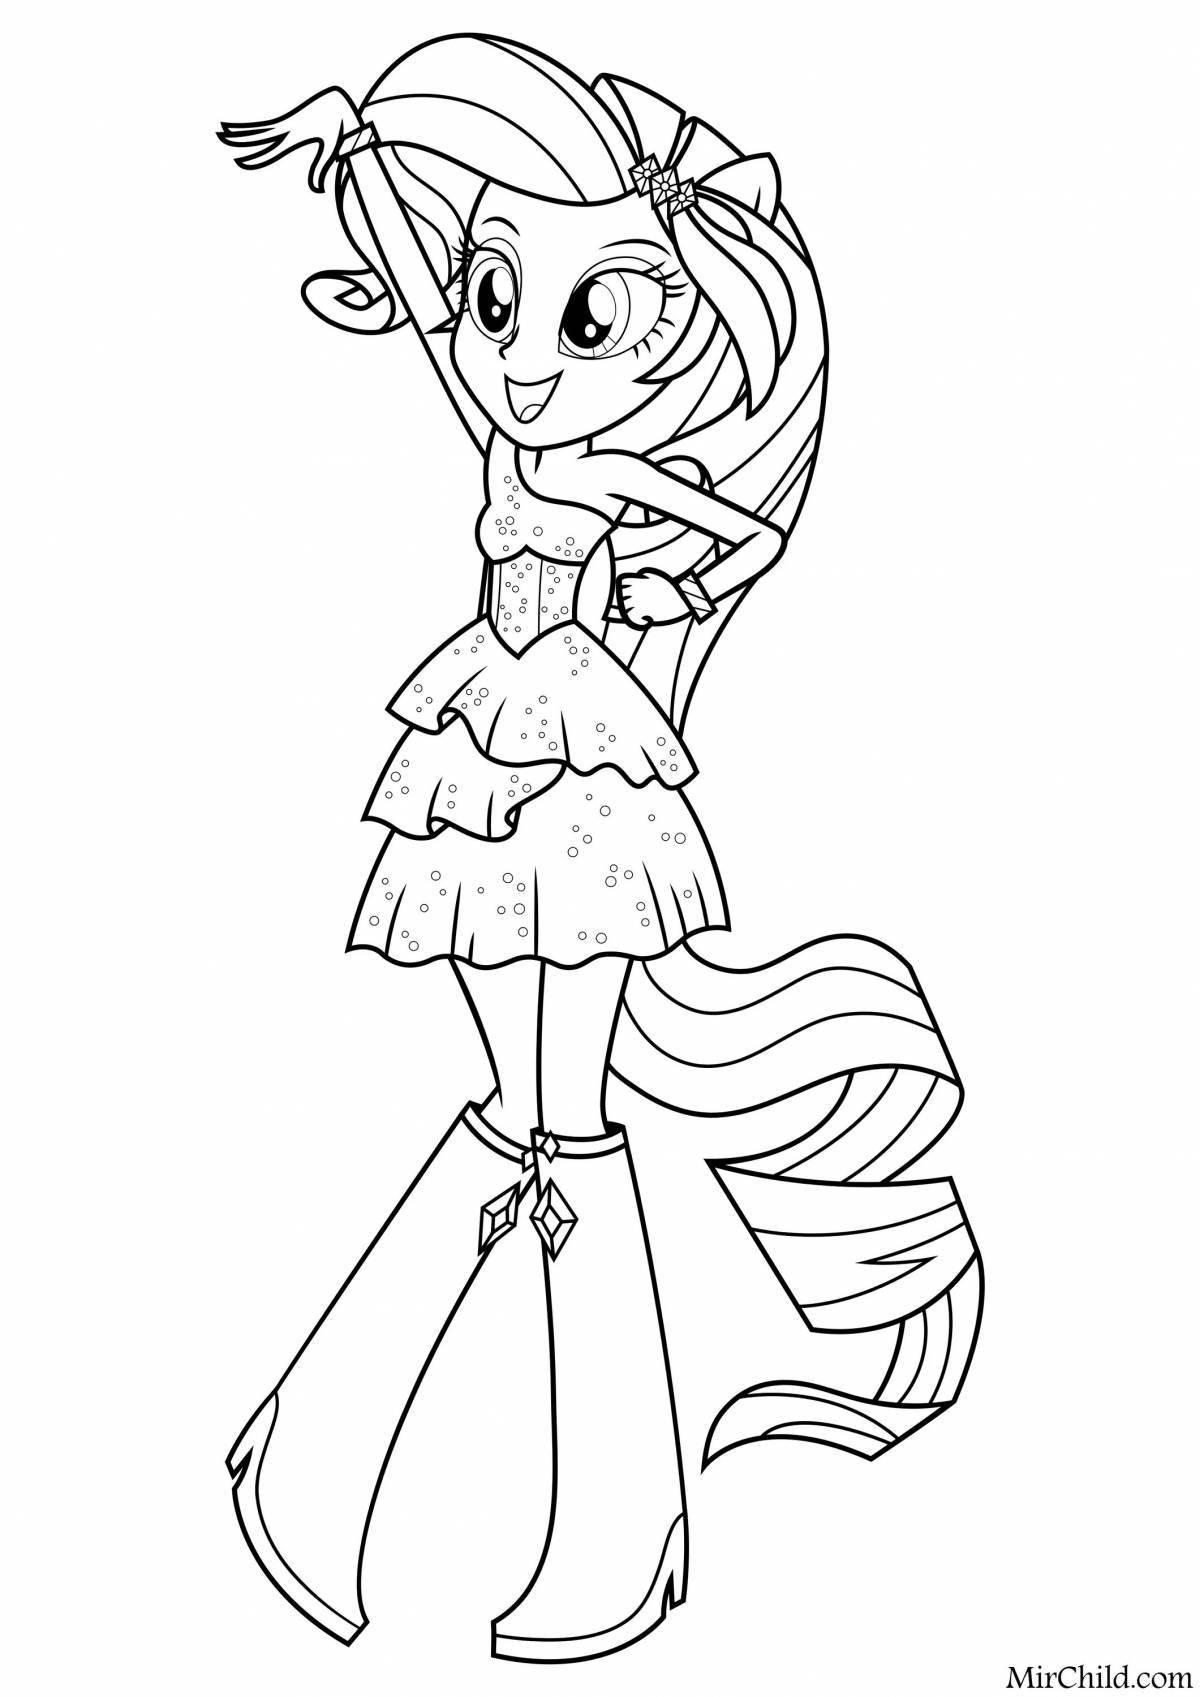 Adorable little pony girls coloring book